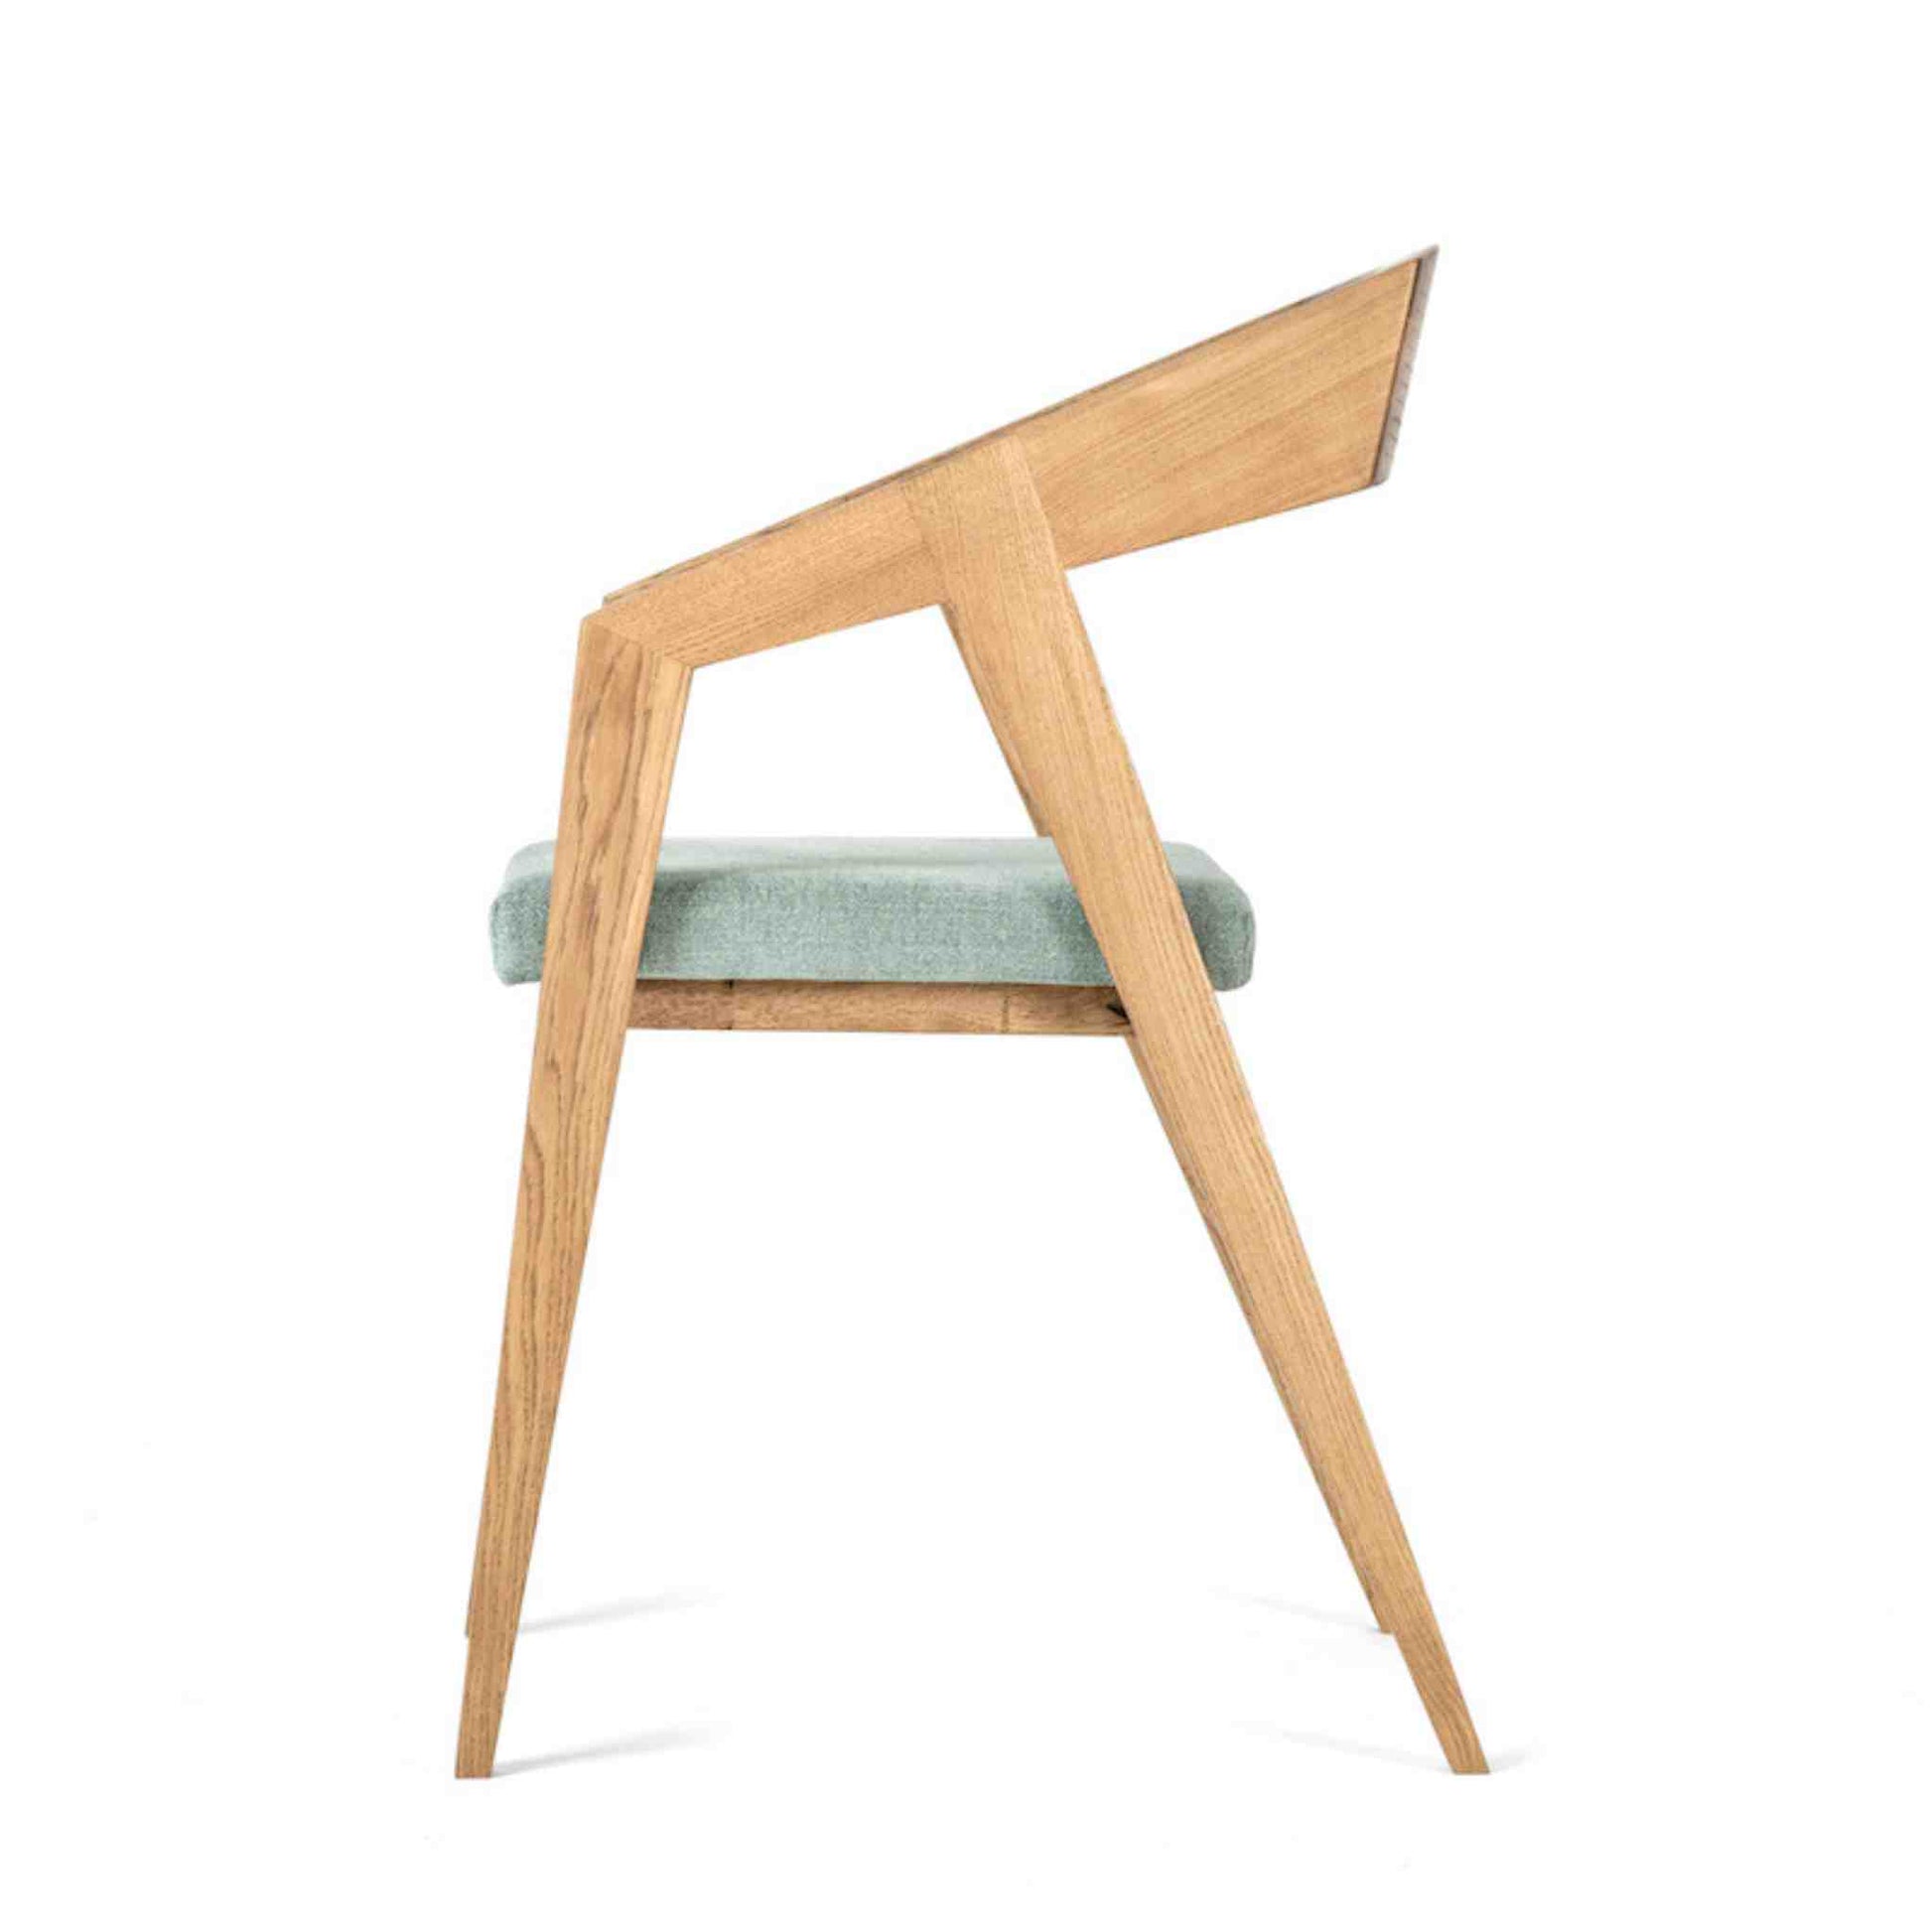 ÉTAUDORÉ Parsenn Solid Oak Wood Chair with Turquoise Upholstery, Side View